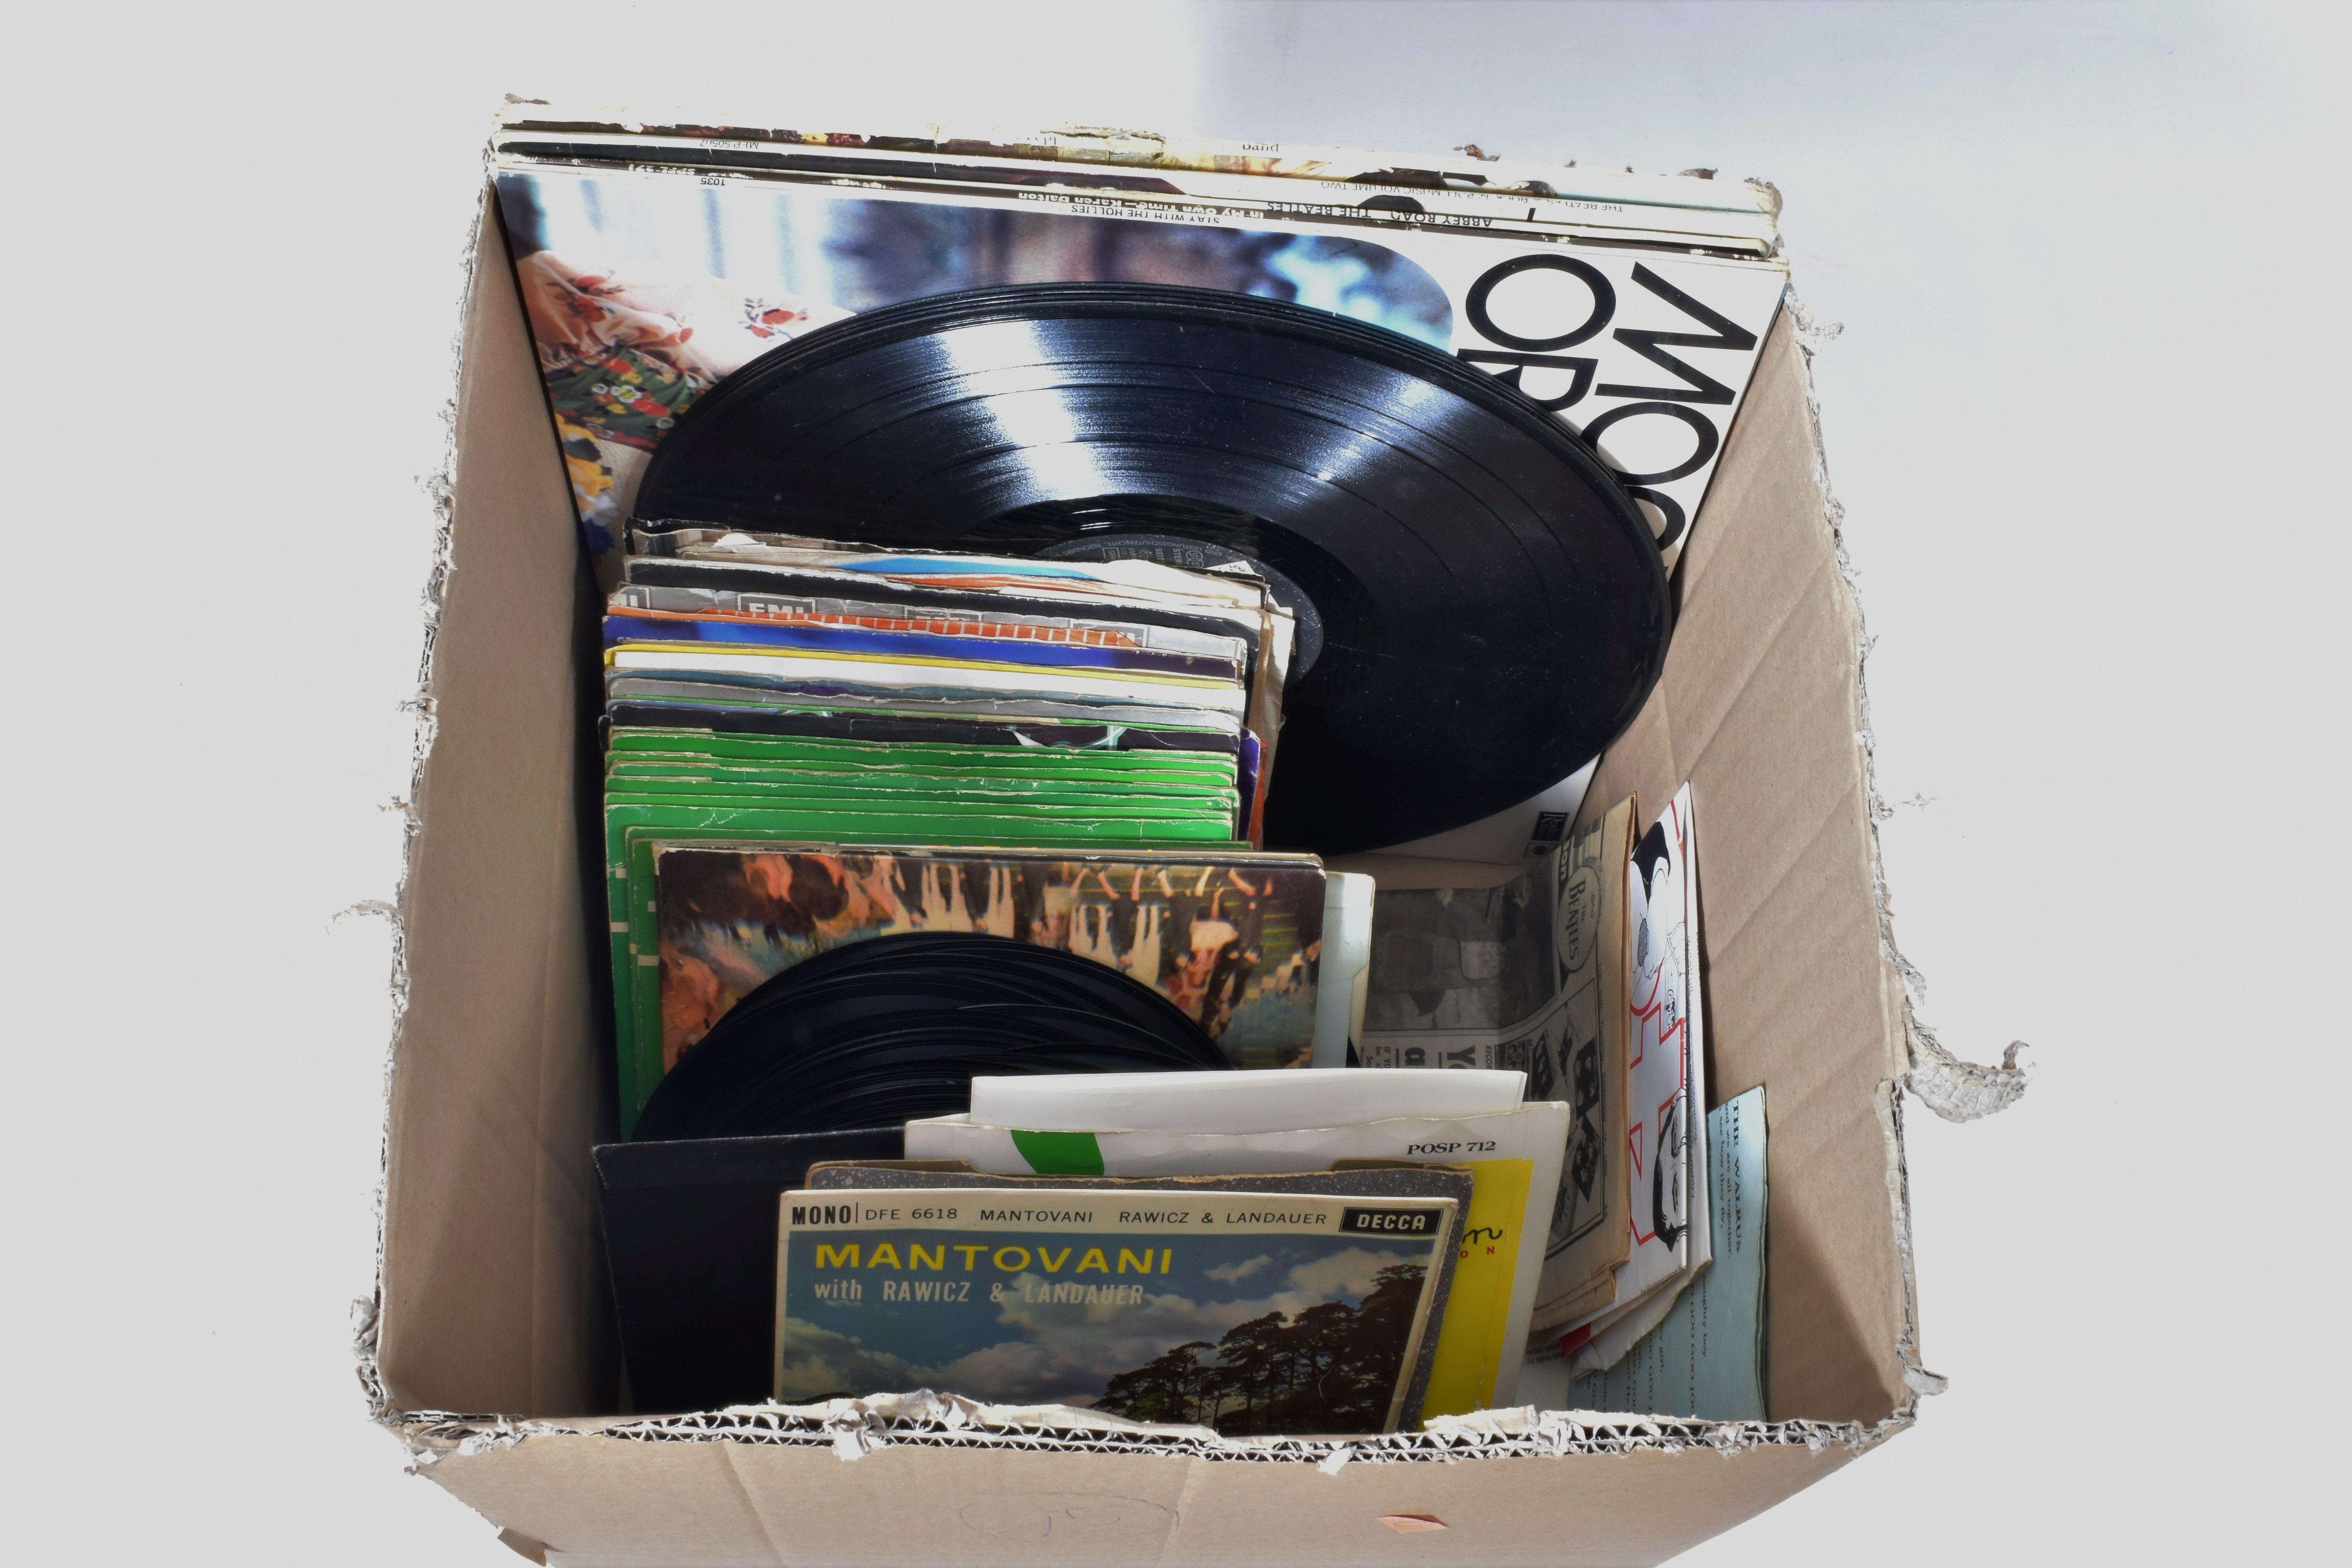 A TRAY CONTAINING OVER SEVENTY LPs, EPs AND SINGLES by artists such as The Beatles, John Lennon,